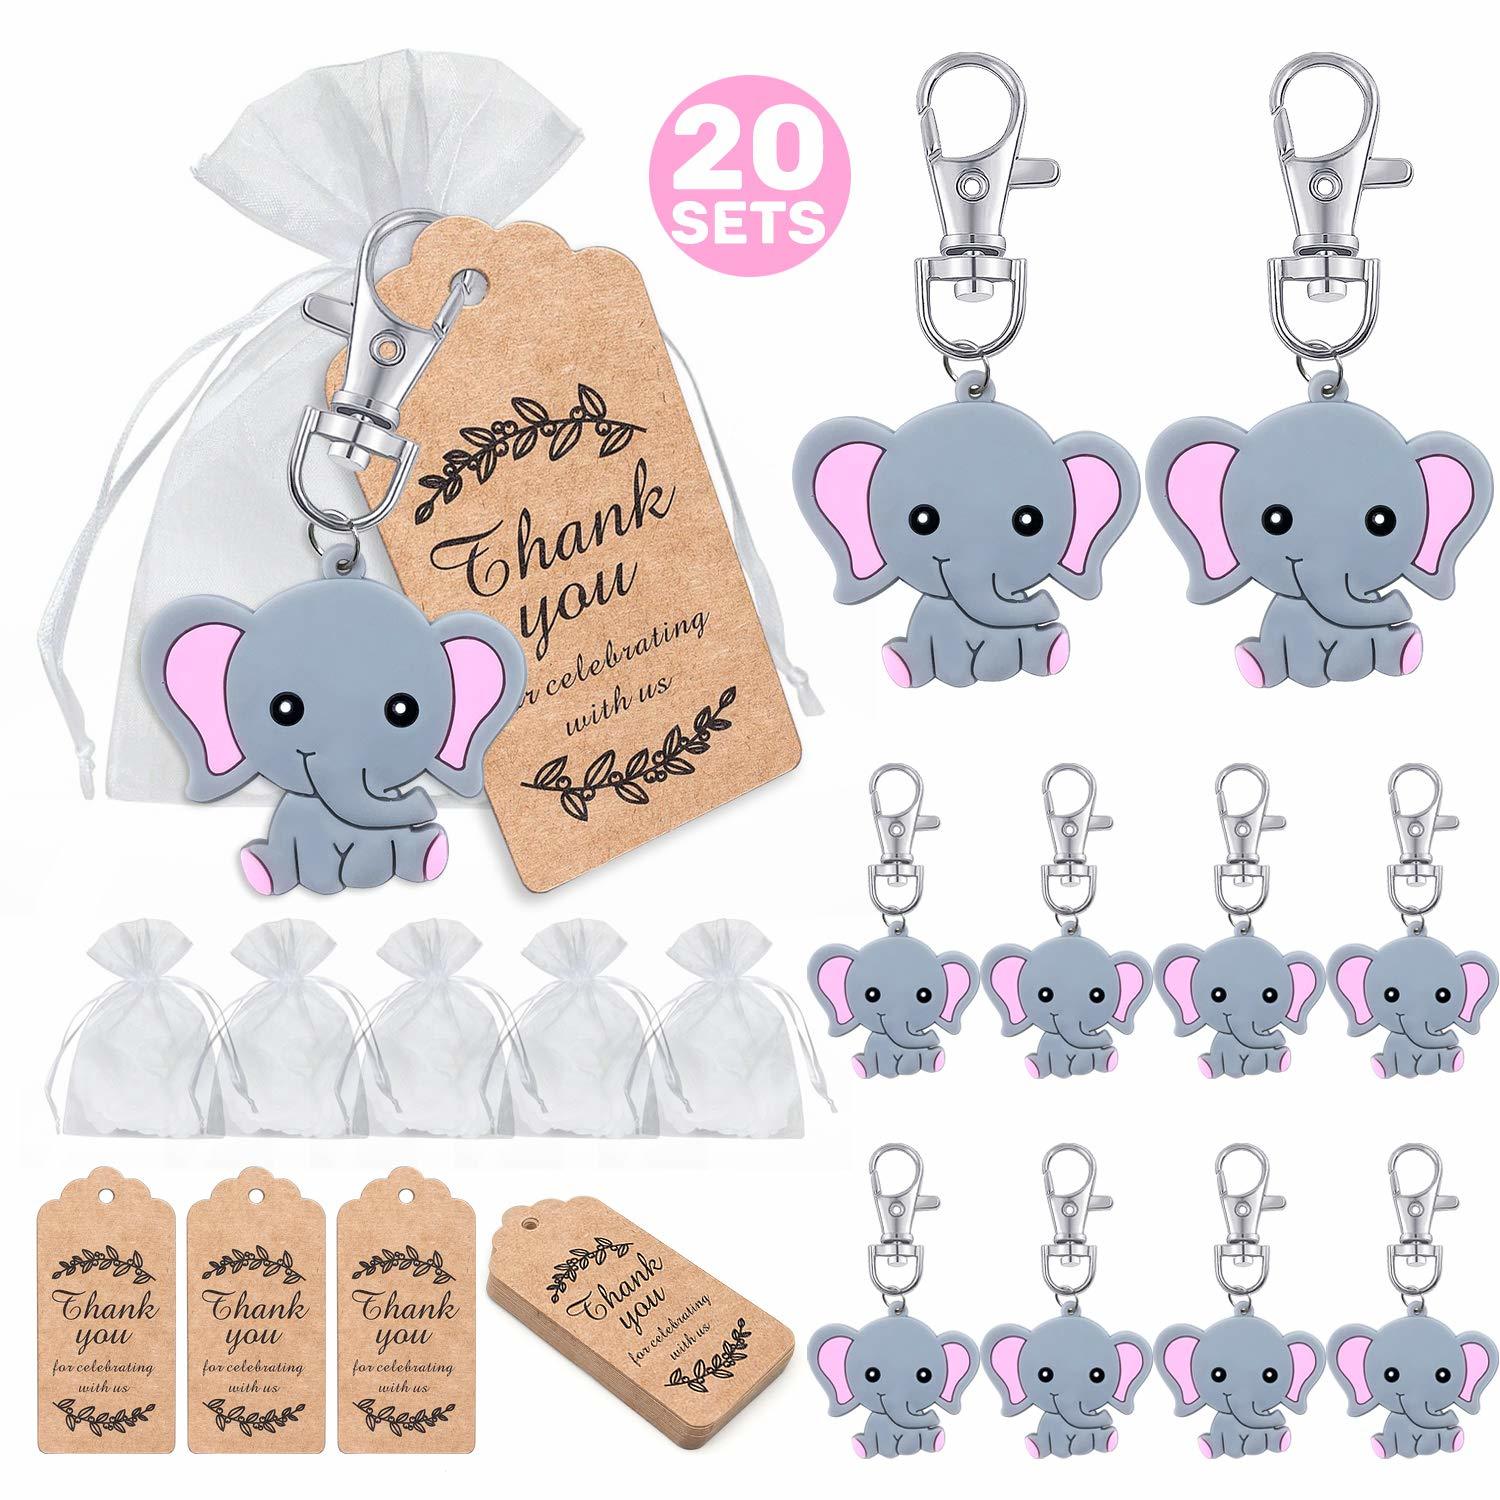 20 Sets Baby Shower Return Favors for Guests, Pink Baby Elephant Keychains +…